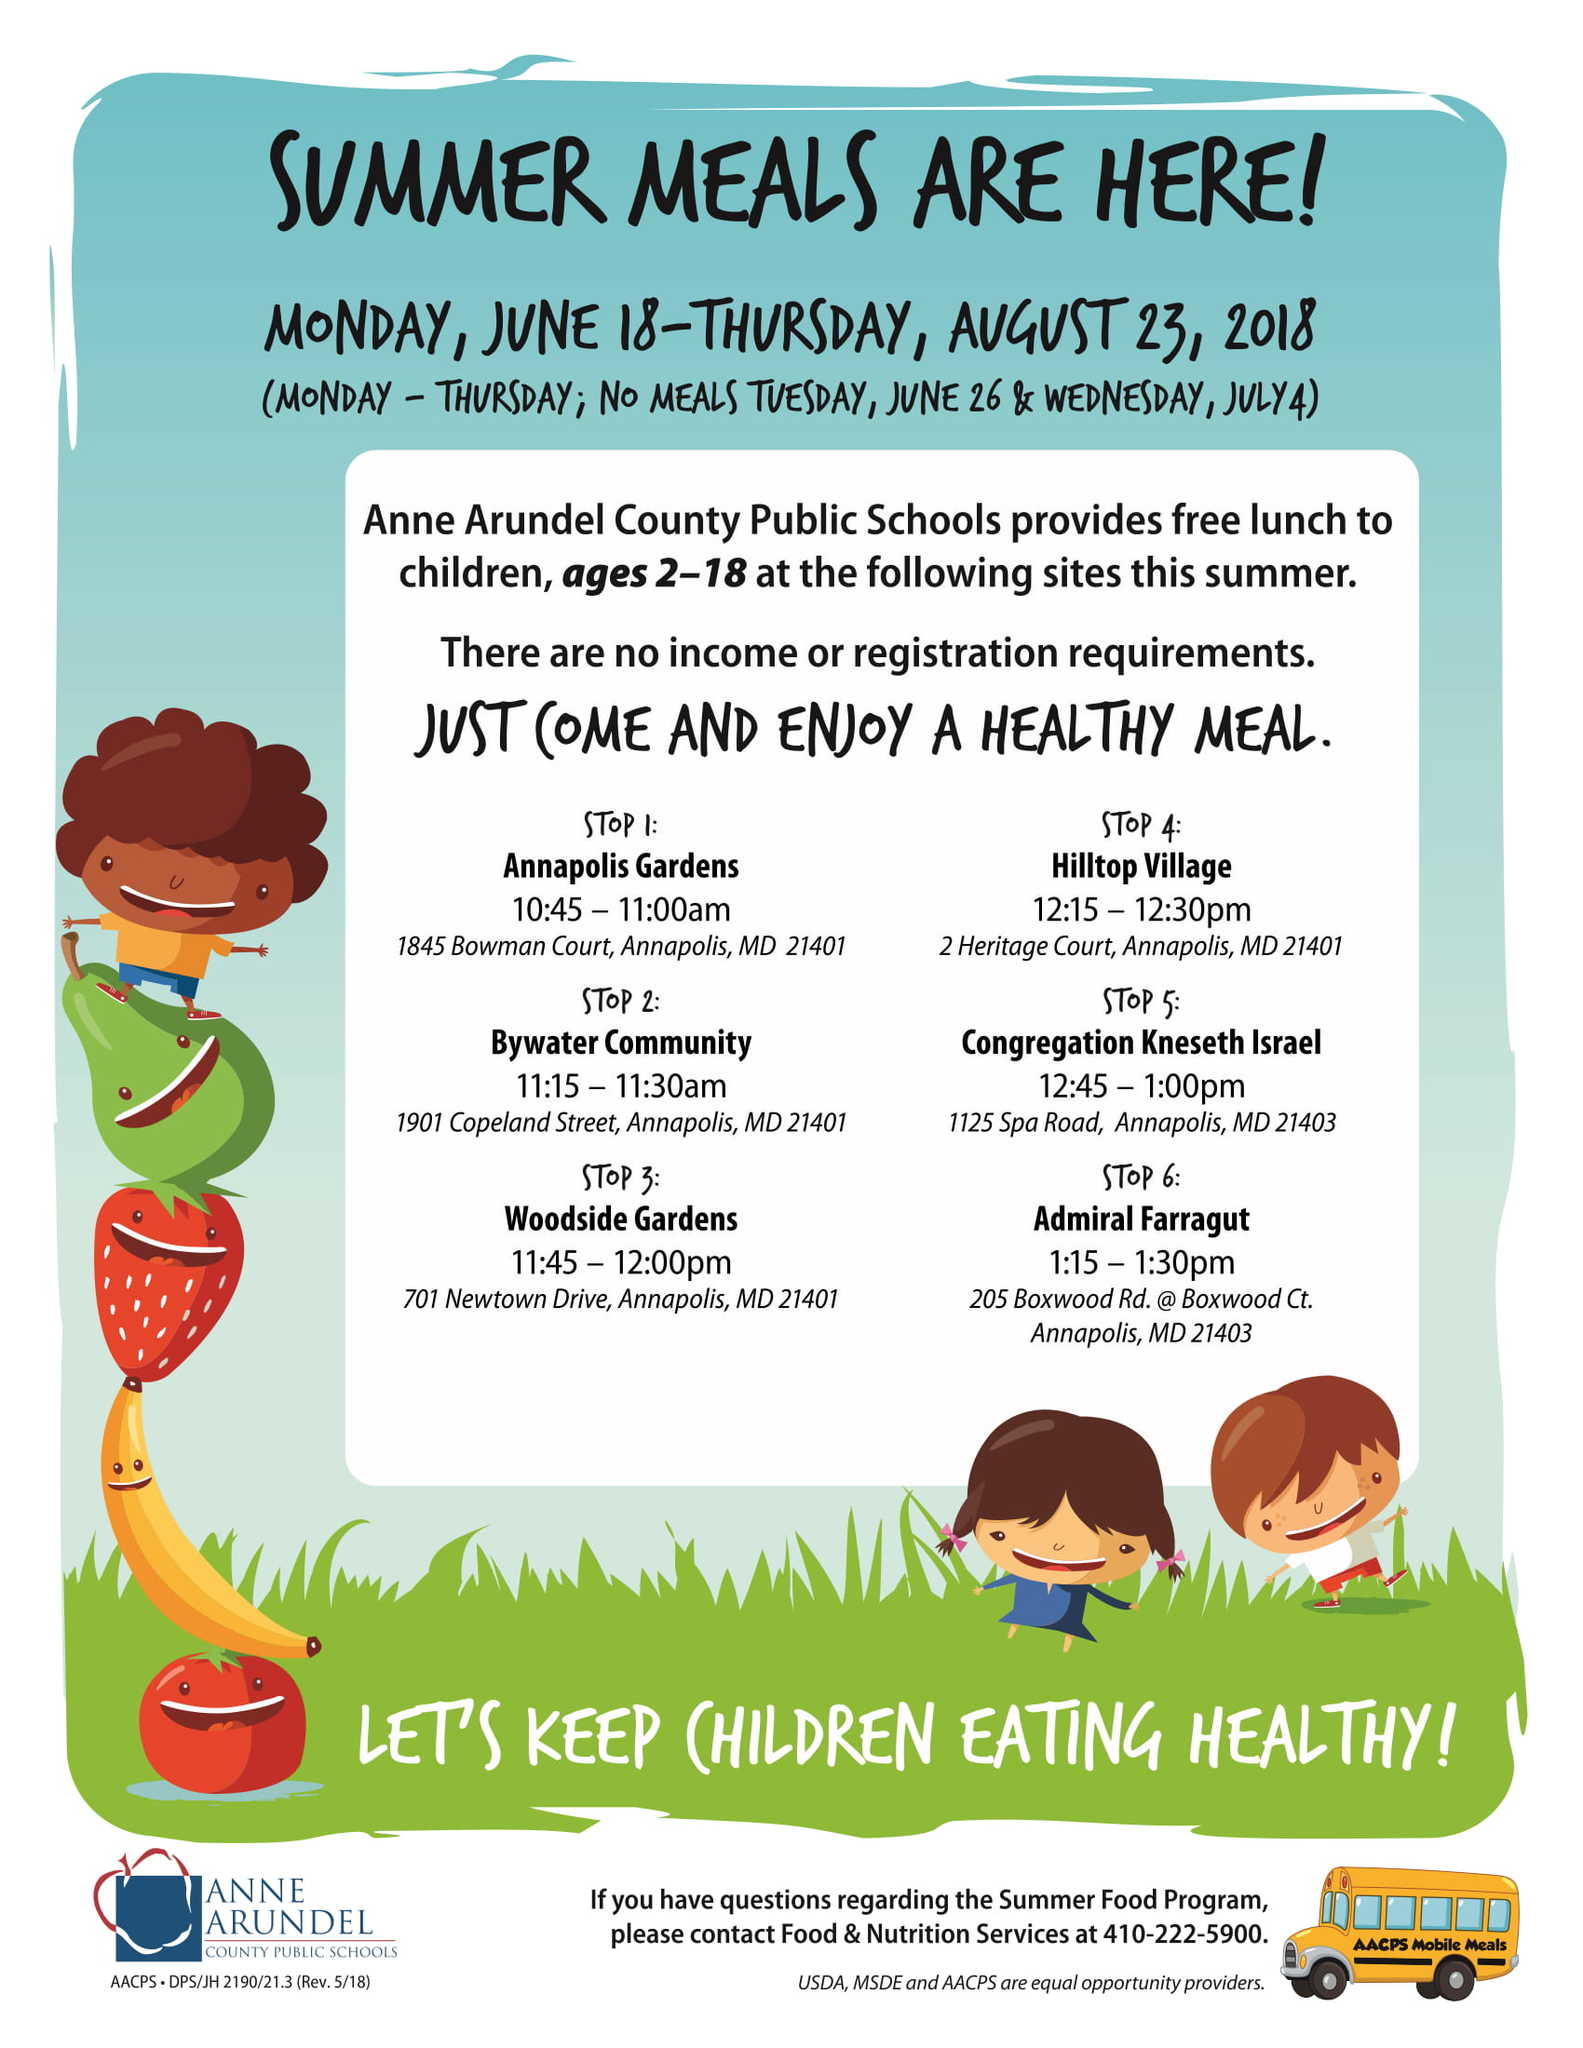 AACPS Summer Meals Annapolis June 18 to August 23, 2018 11